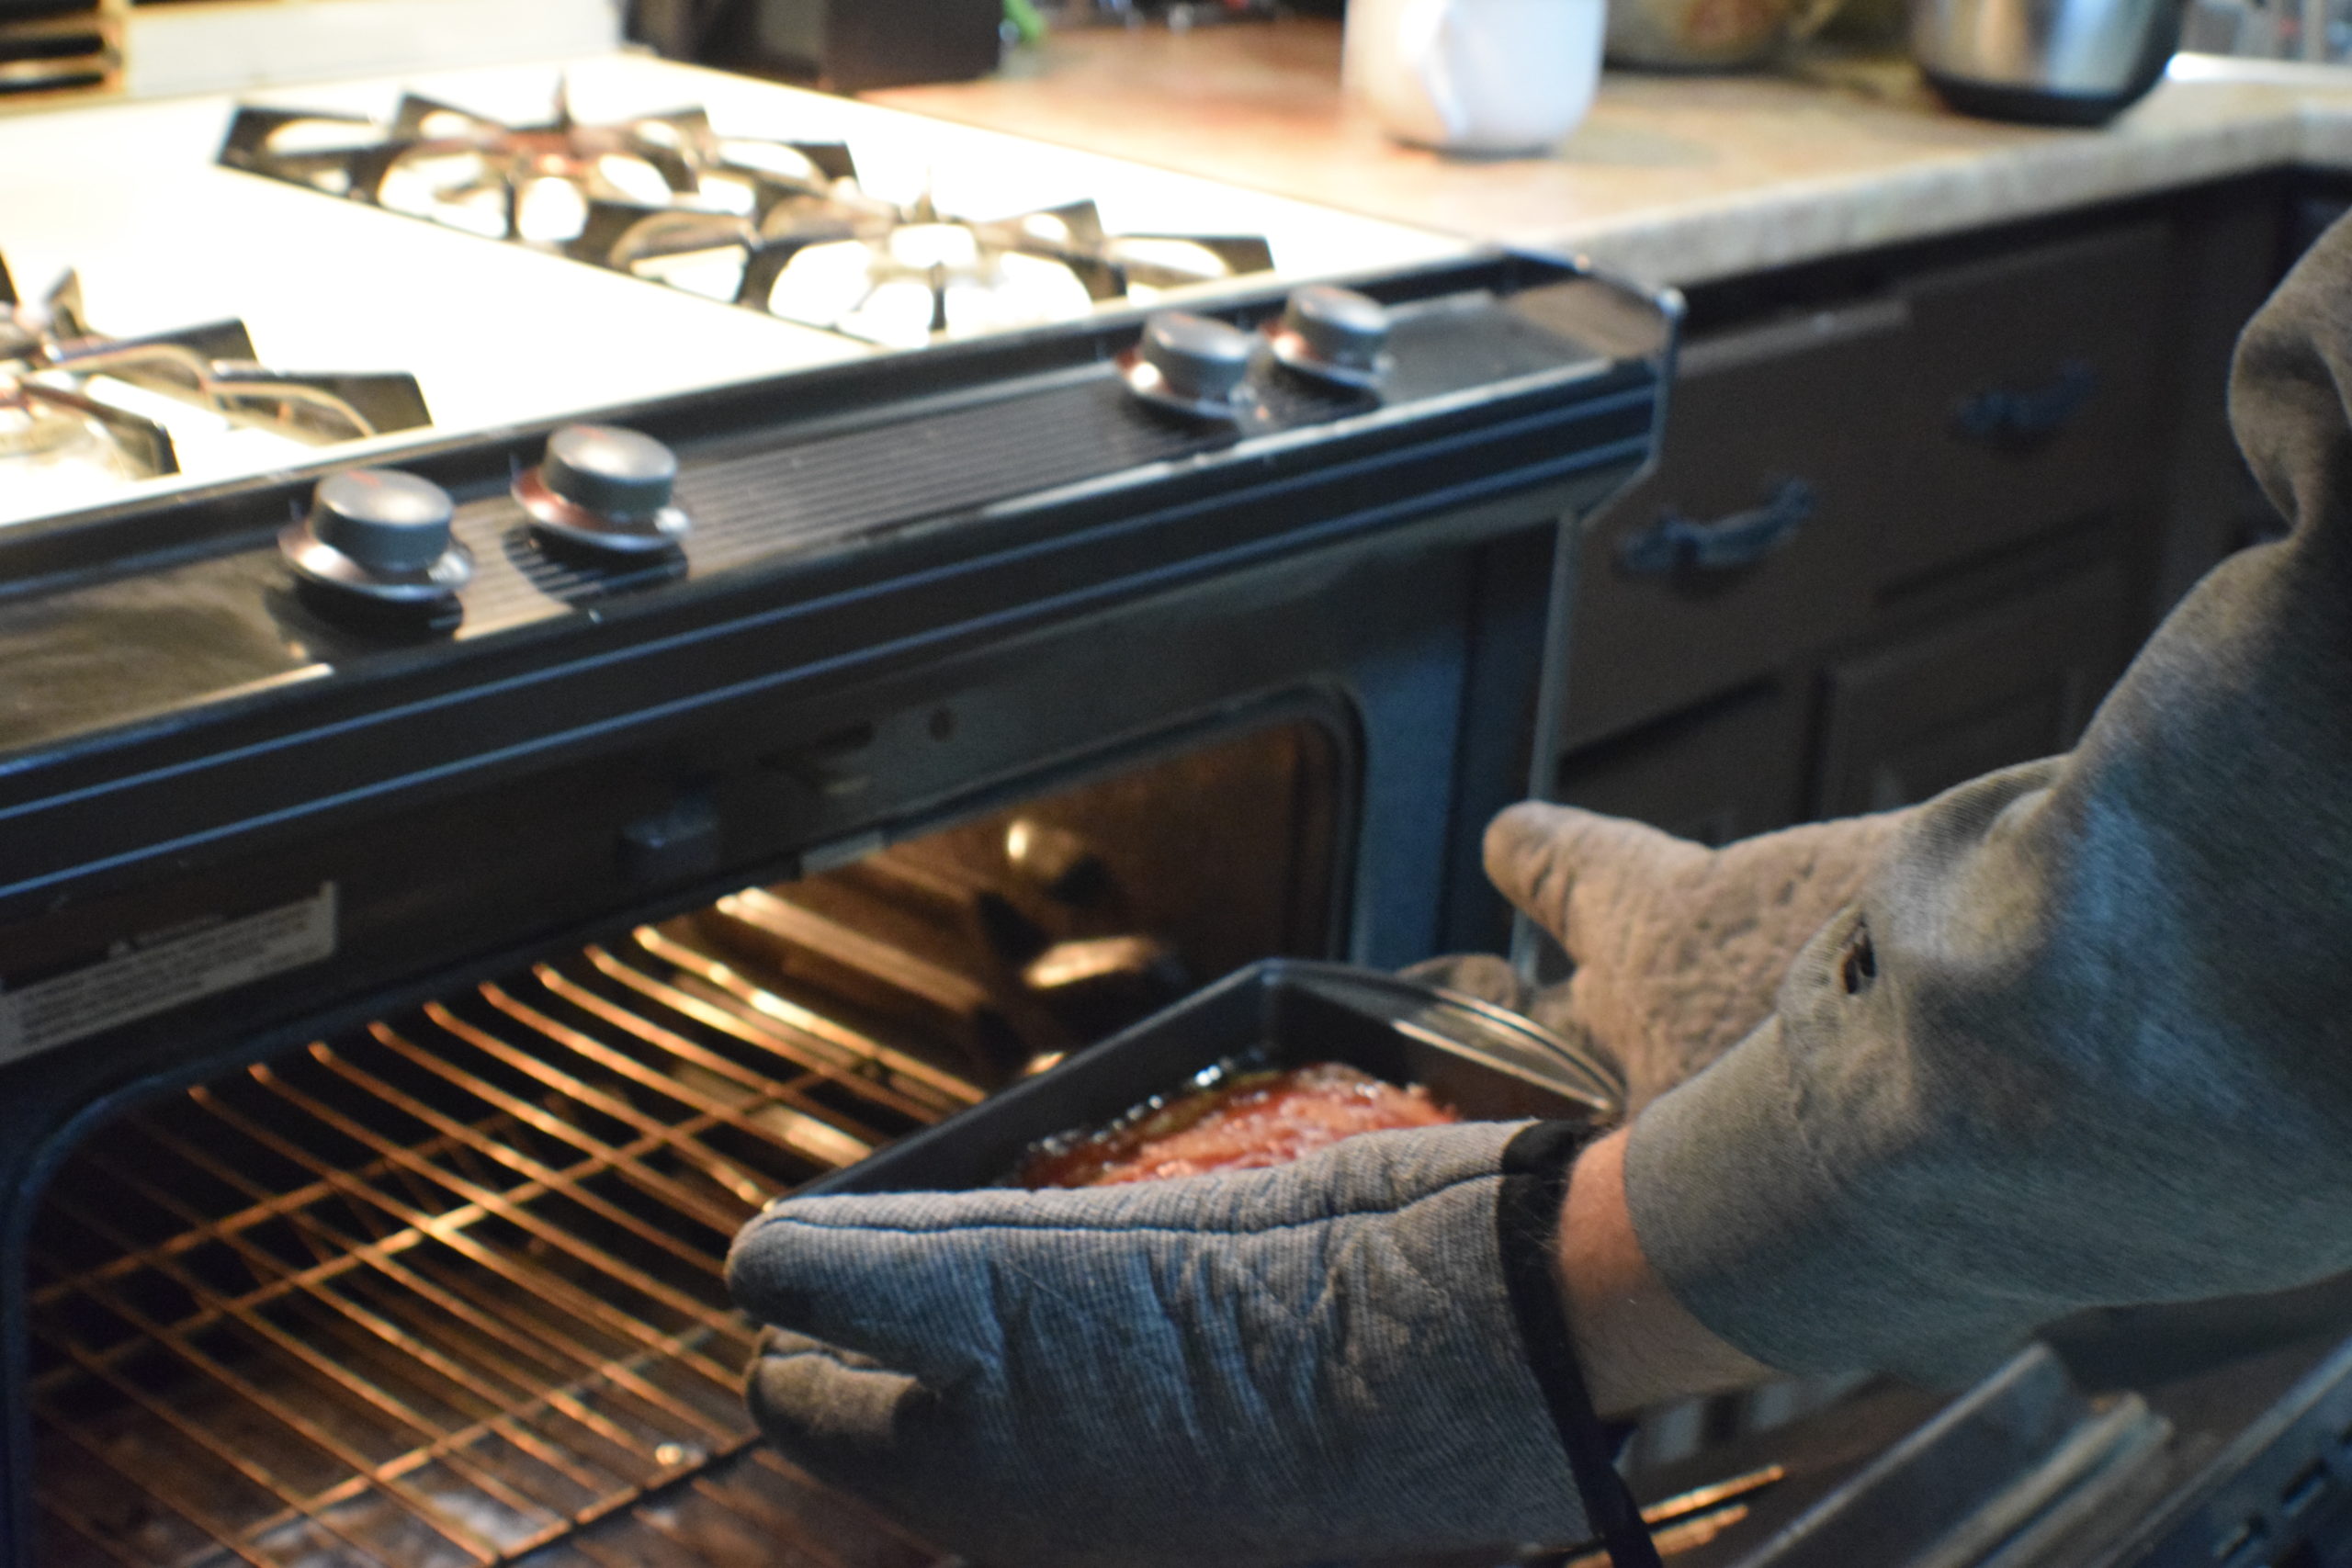 Man with grey striped oven mitts removing meatloaf from oven